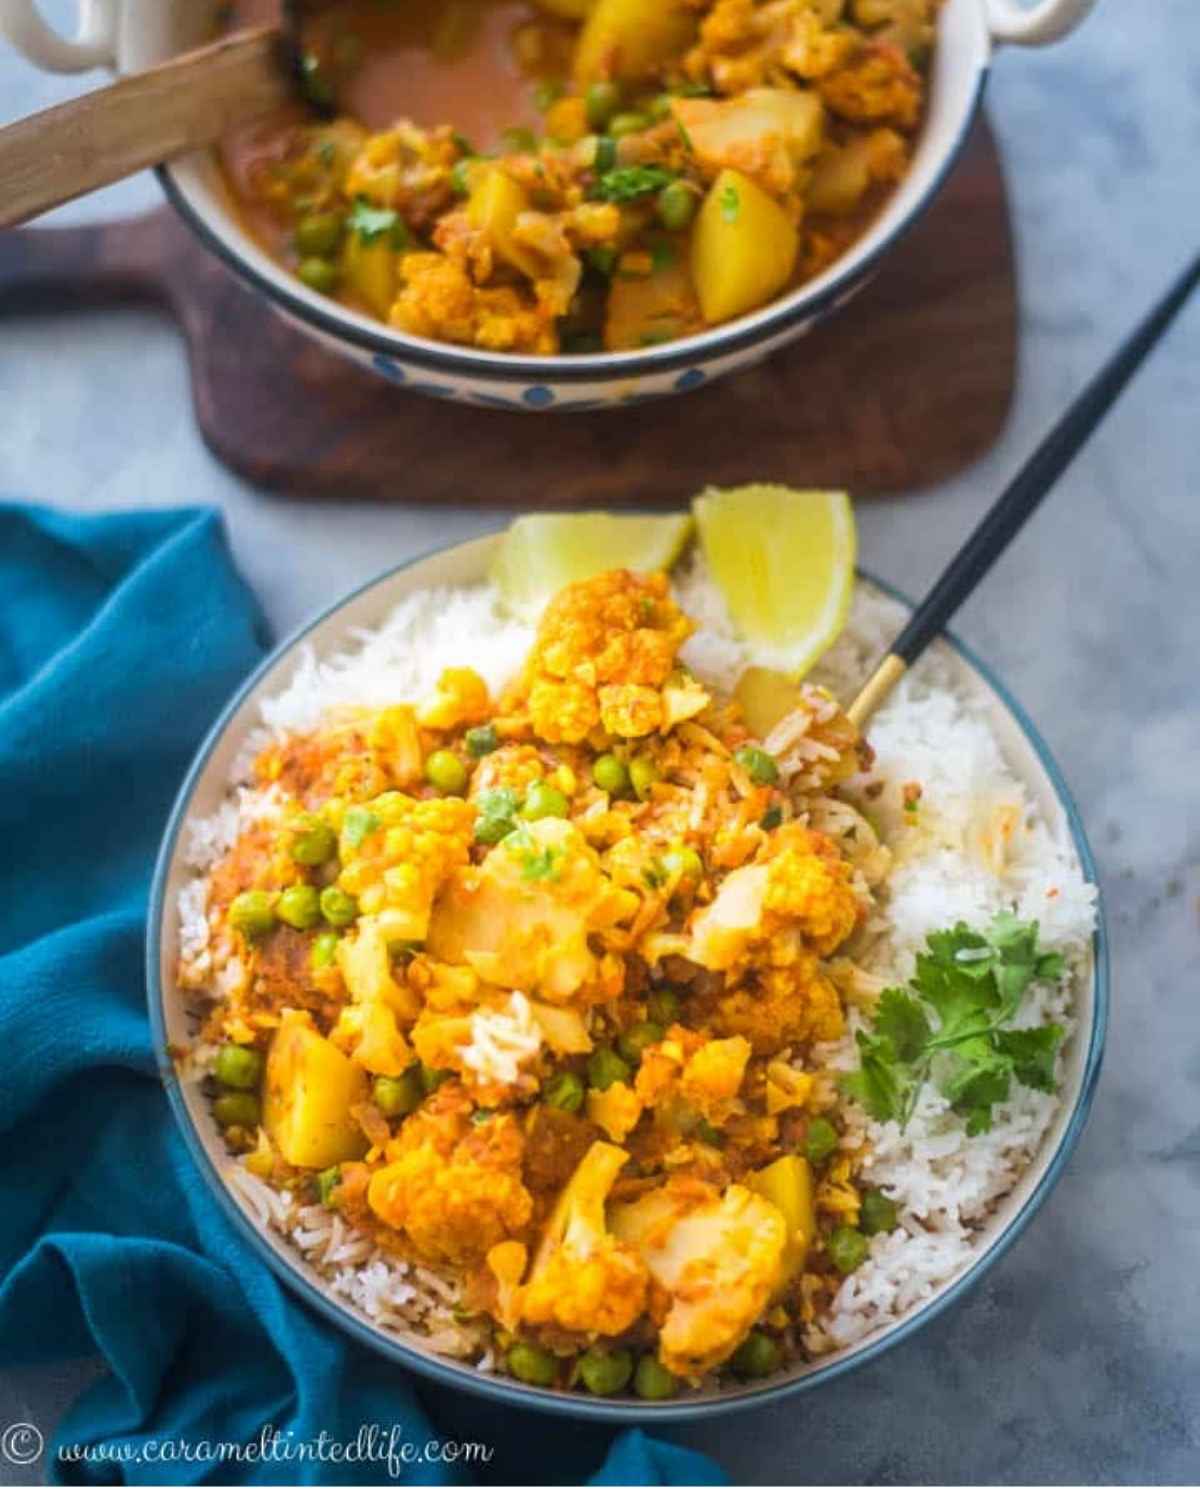 Cauliflower, peas and potato curry plated in a bowl with rice